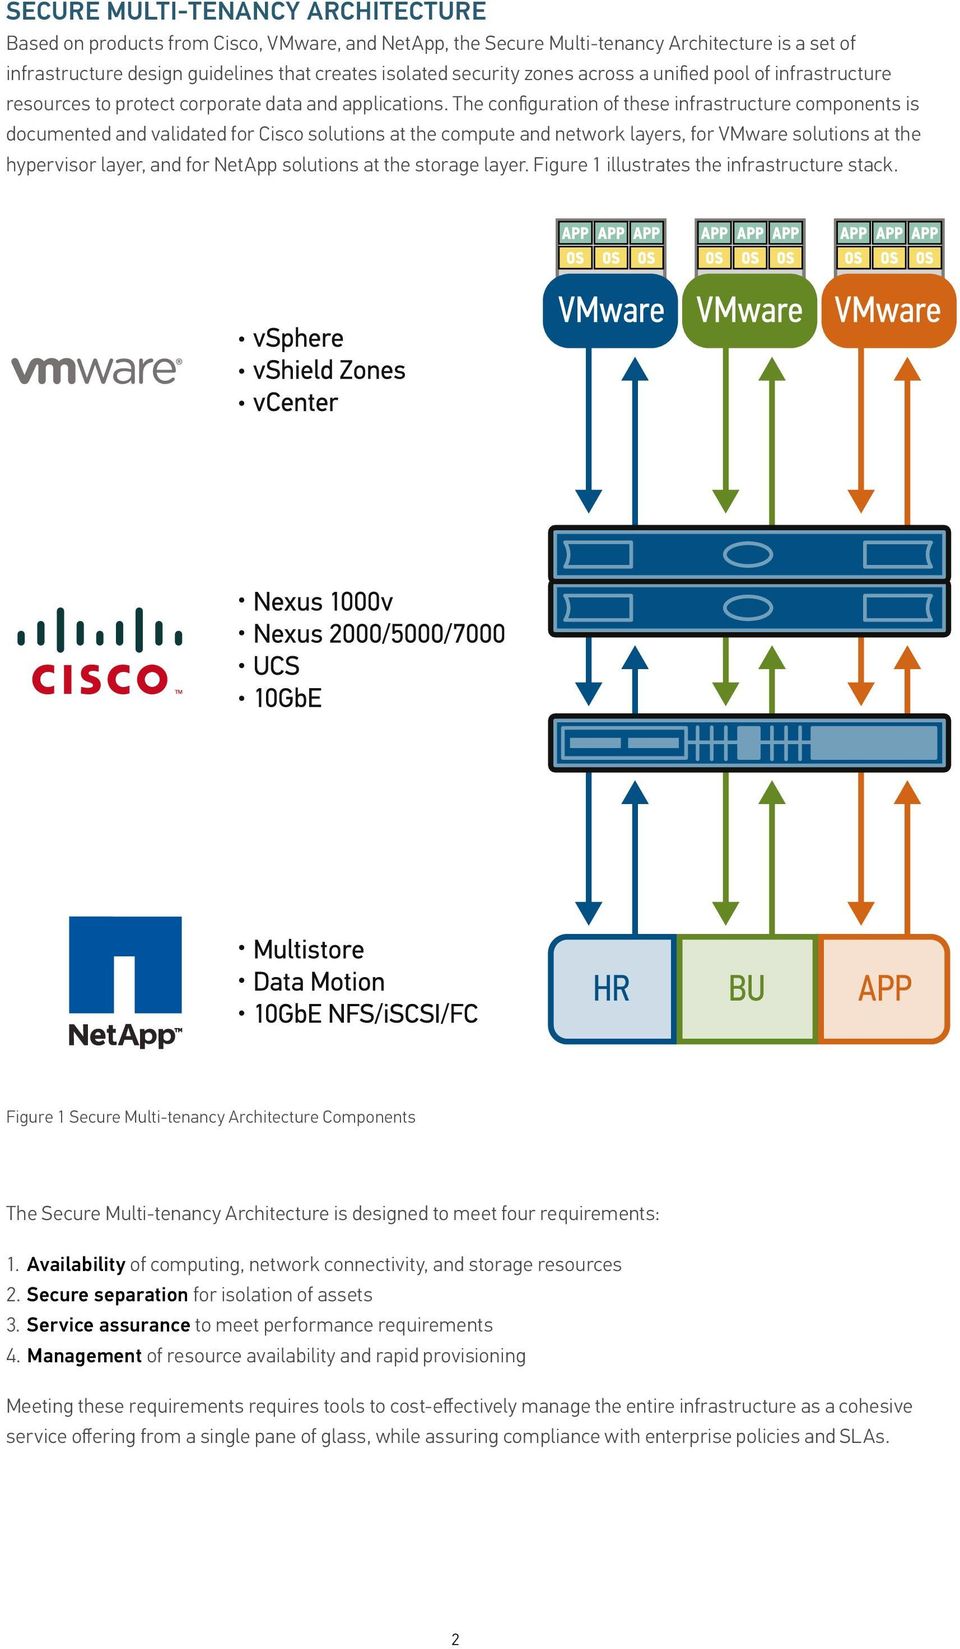 The configuration of these infrastructure components is documented and validated for Cisco solutions at the compute and network layers, for VMware solutions at the hypervisor layer, and for NetApp